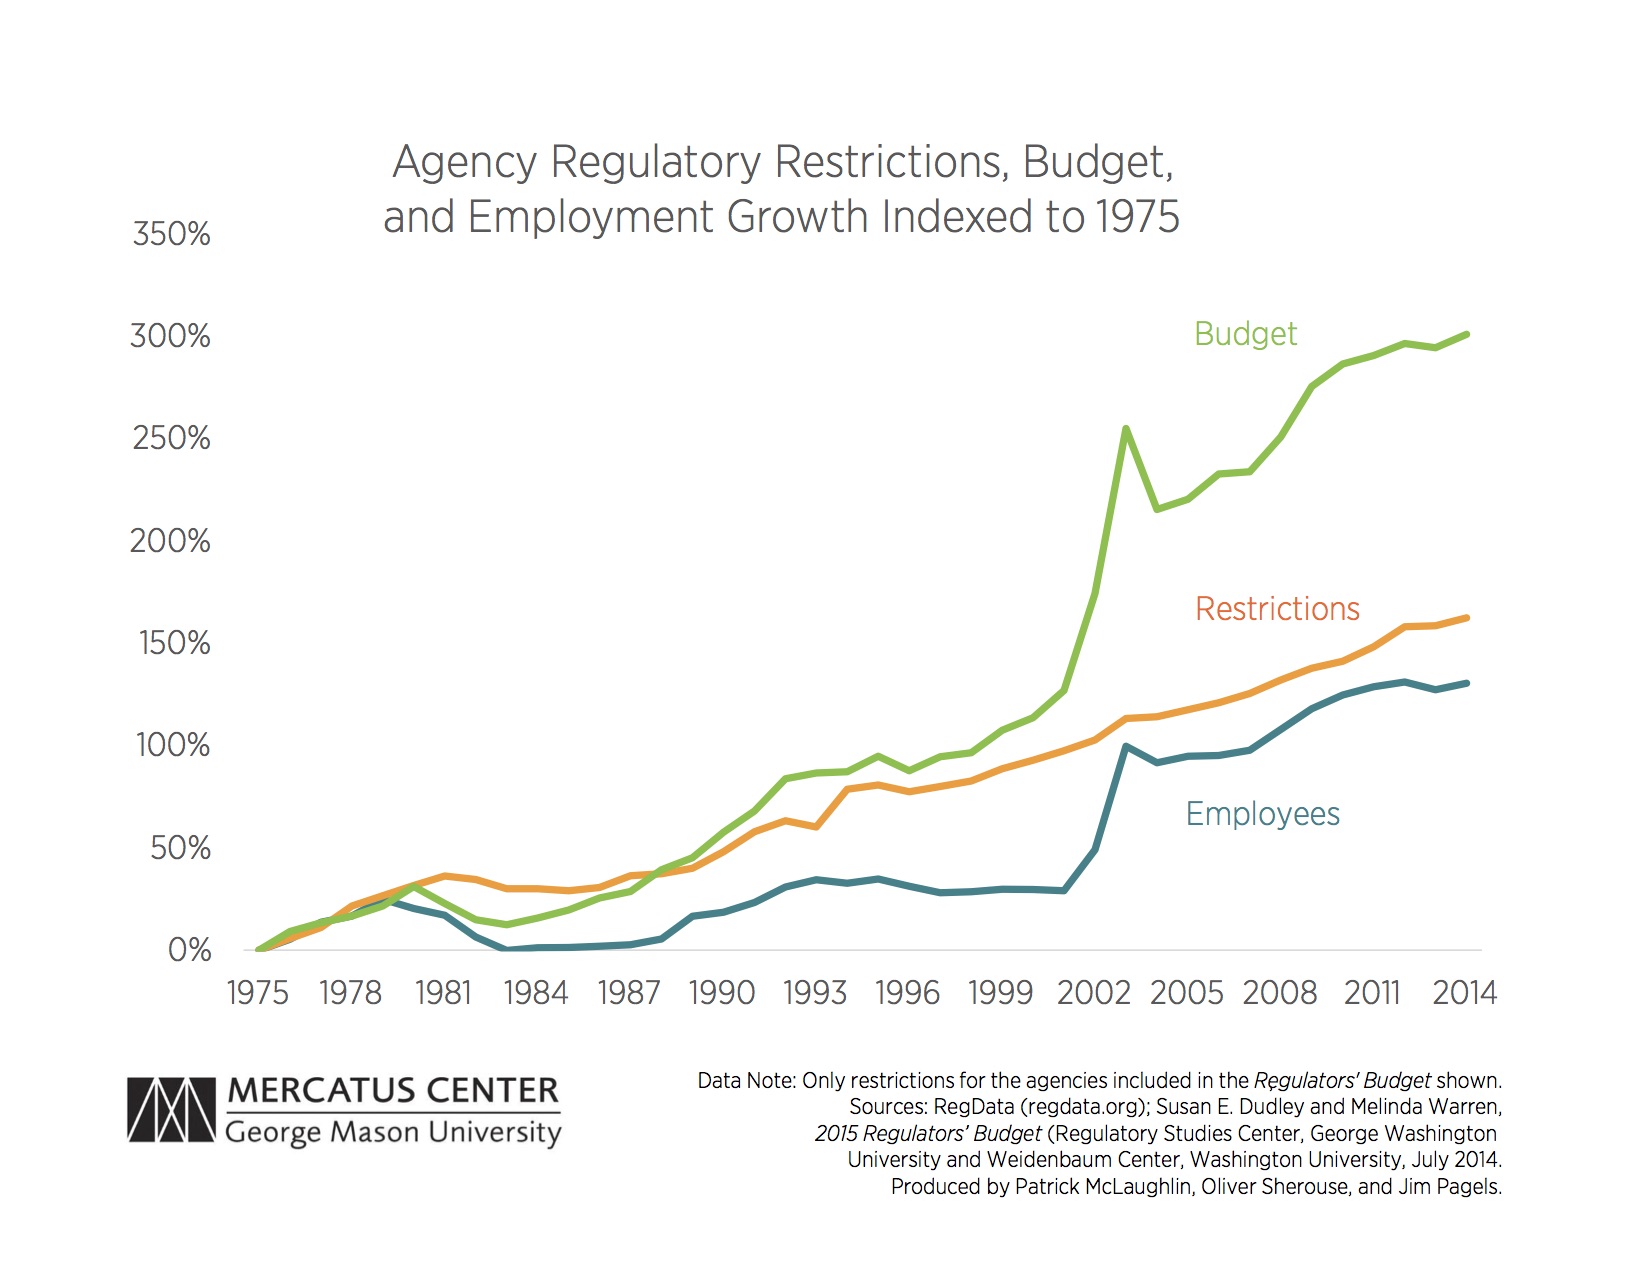 Agency Regulatory Restrictions, Budget, and Employment Growth Indexed to 1975